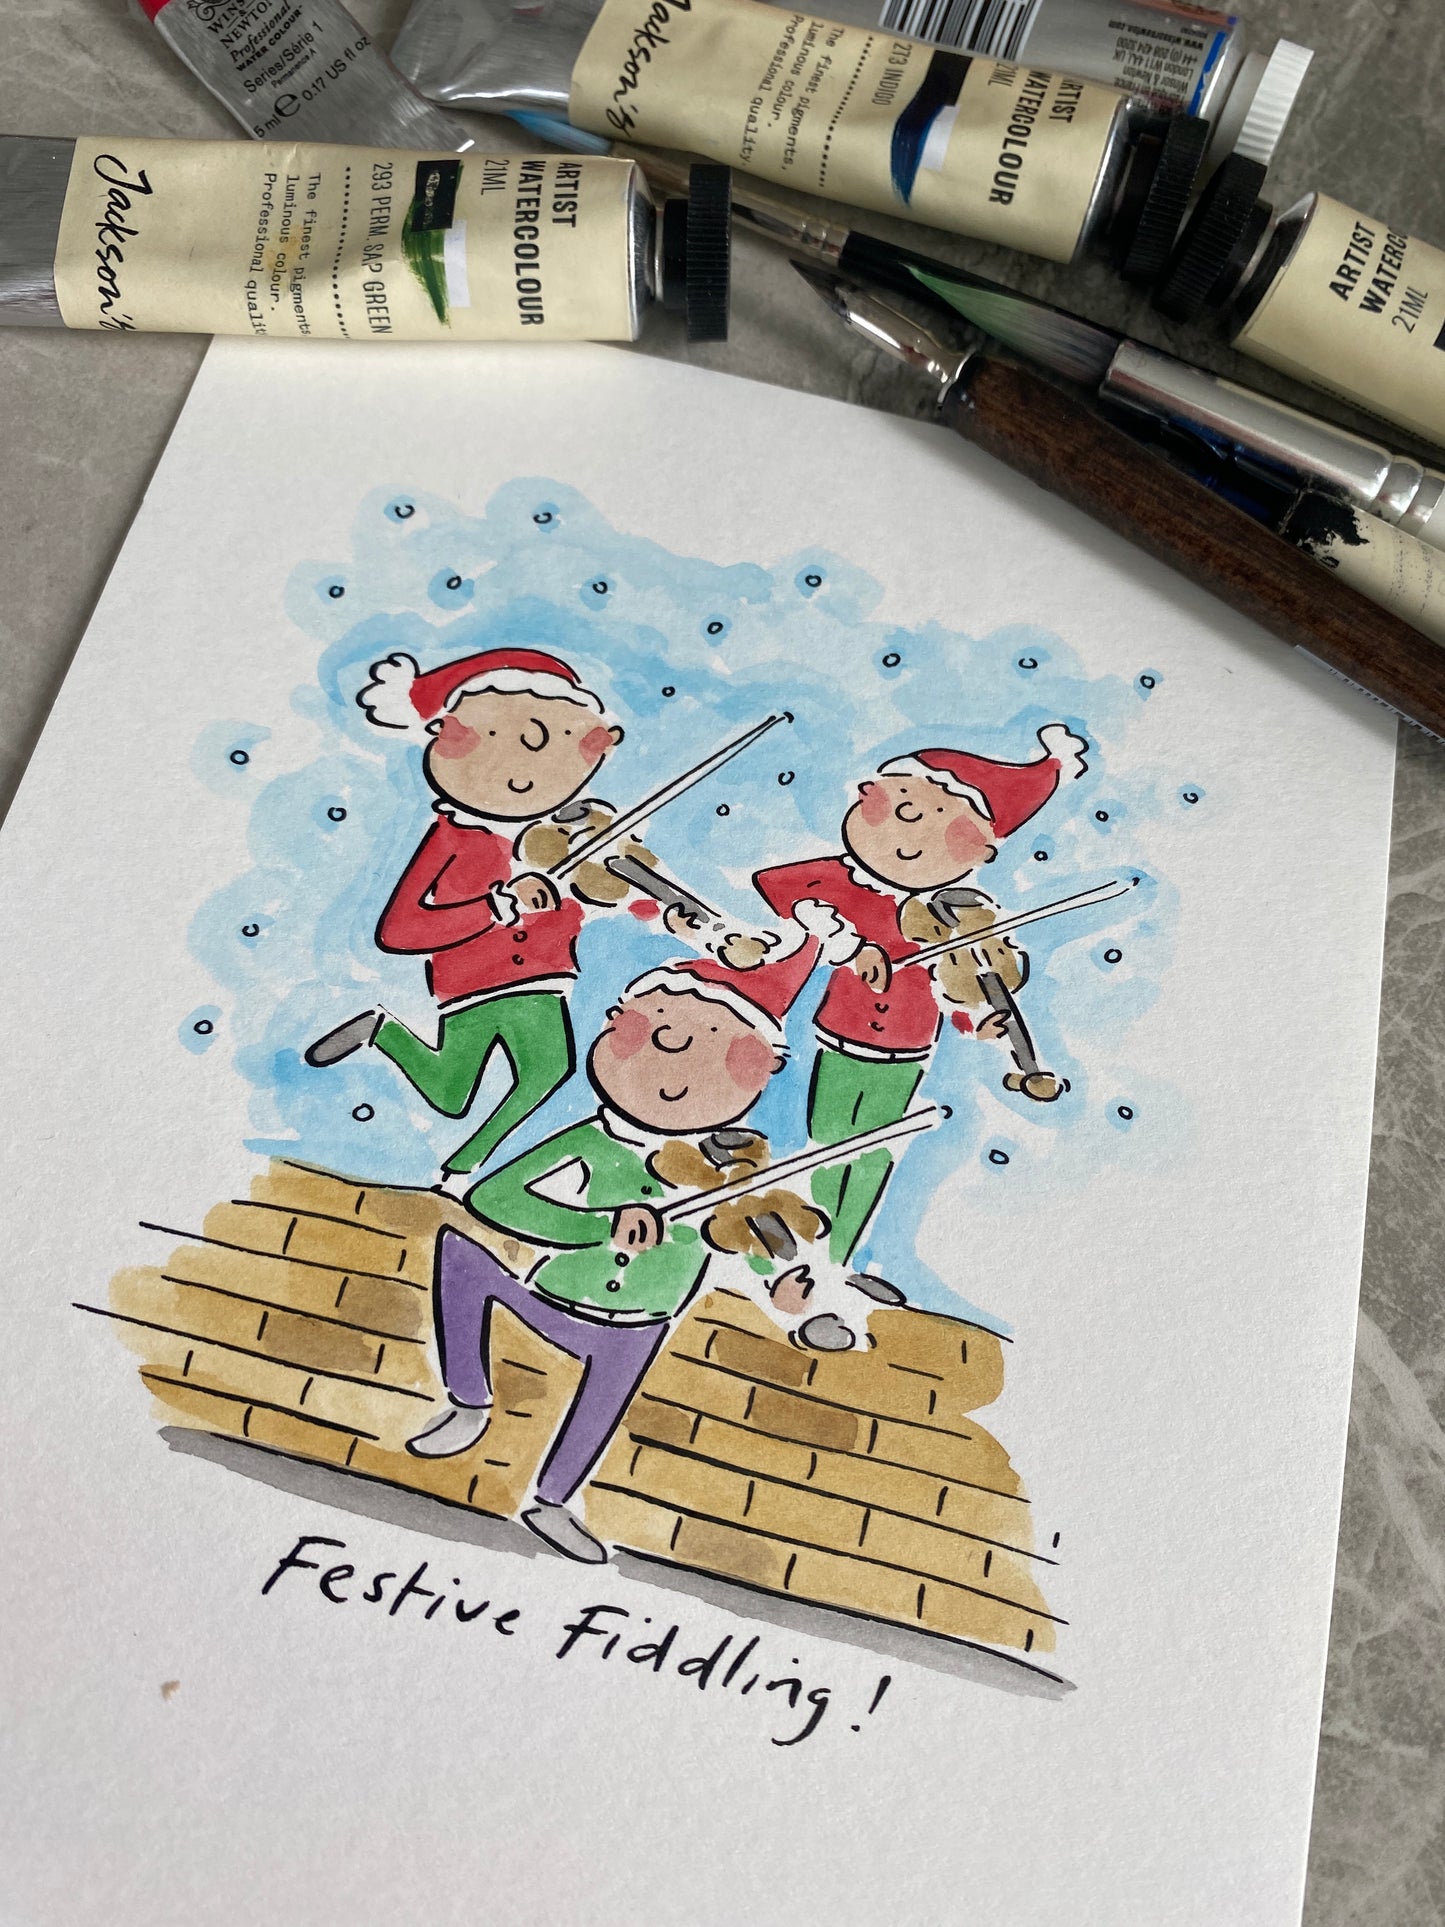 Festive Fiddling original pen and ink and watercolour illustration by Rosie Brooks